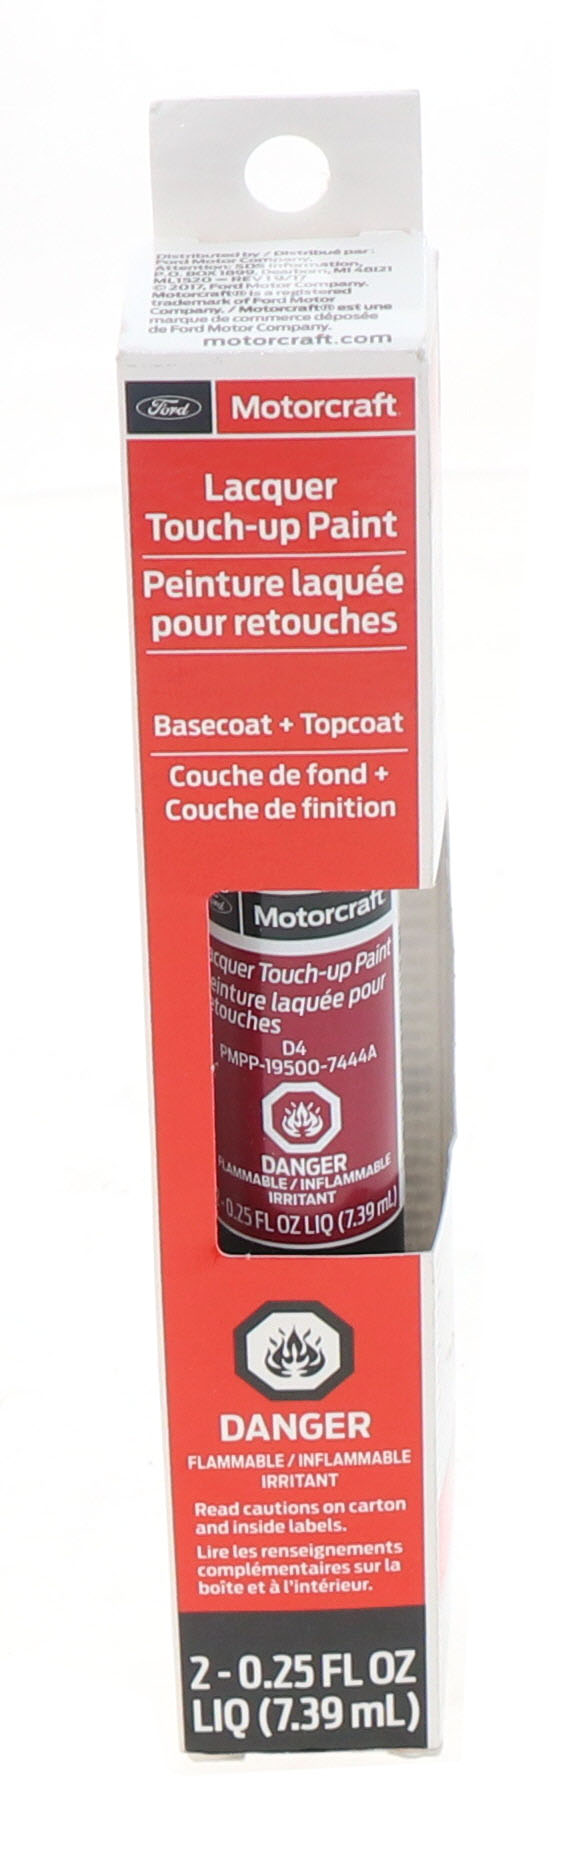 Ford Motorcraft Lacquer Touch-Up Paint